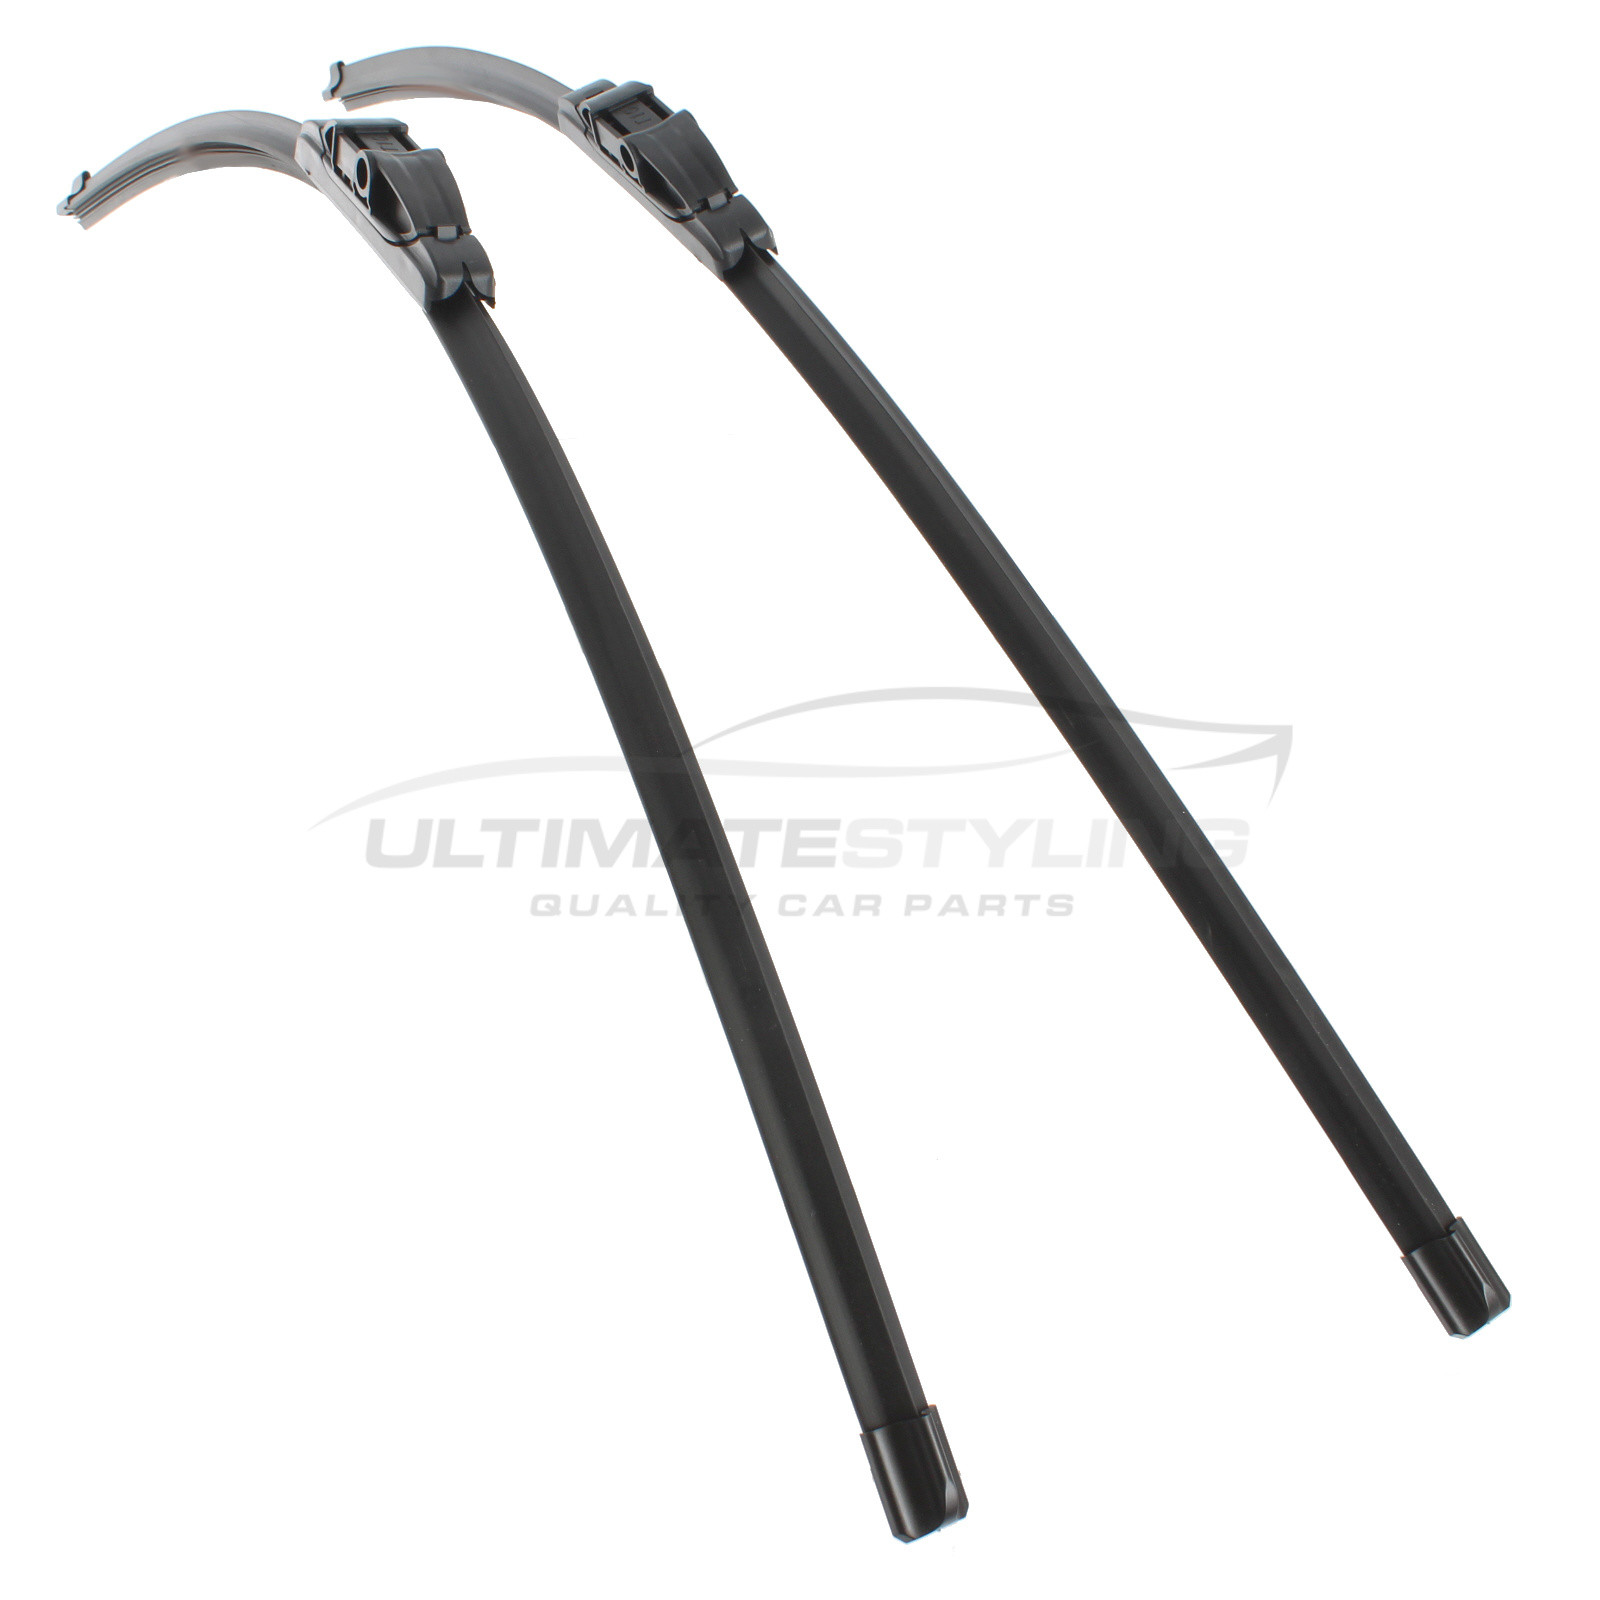 Drivers Side & Passenger Side (Front) Wiper Blades for Citroen C4 Grand Picasso